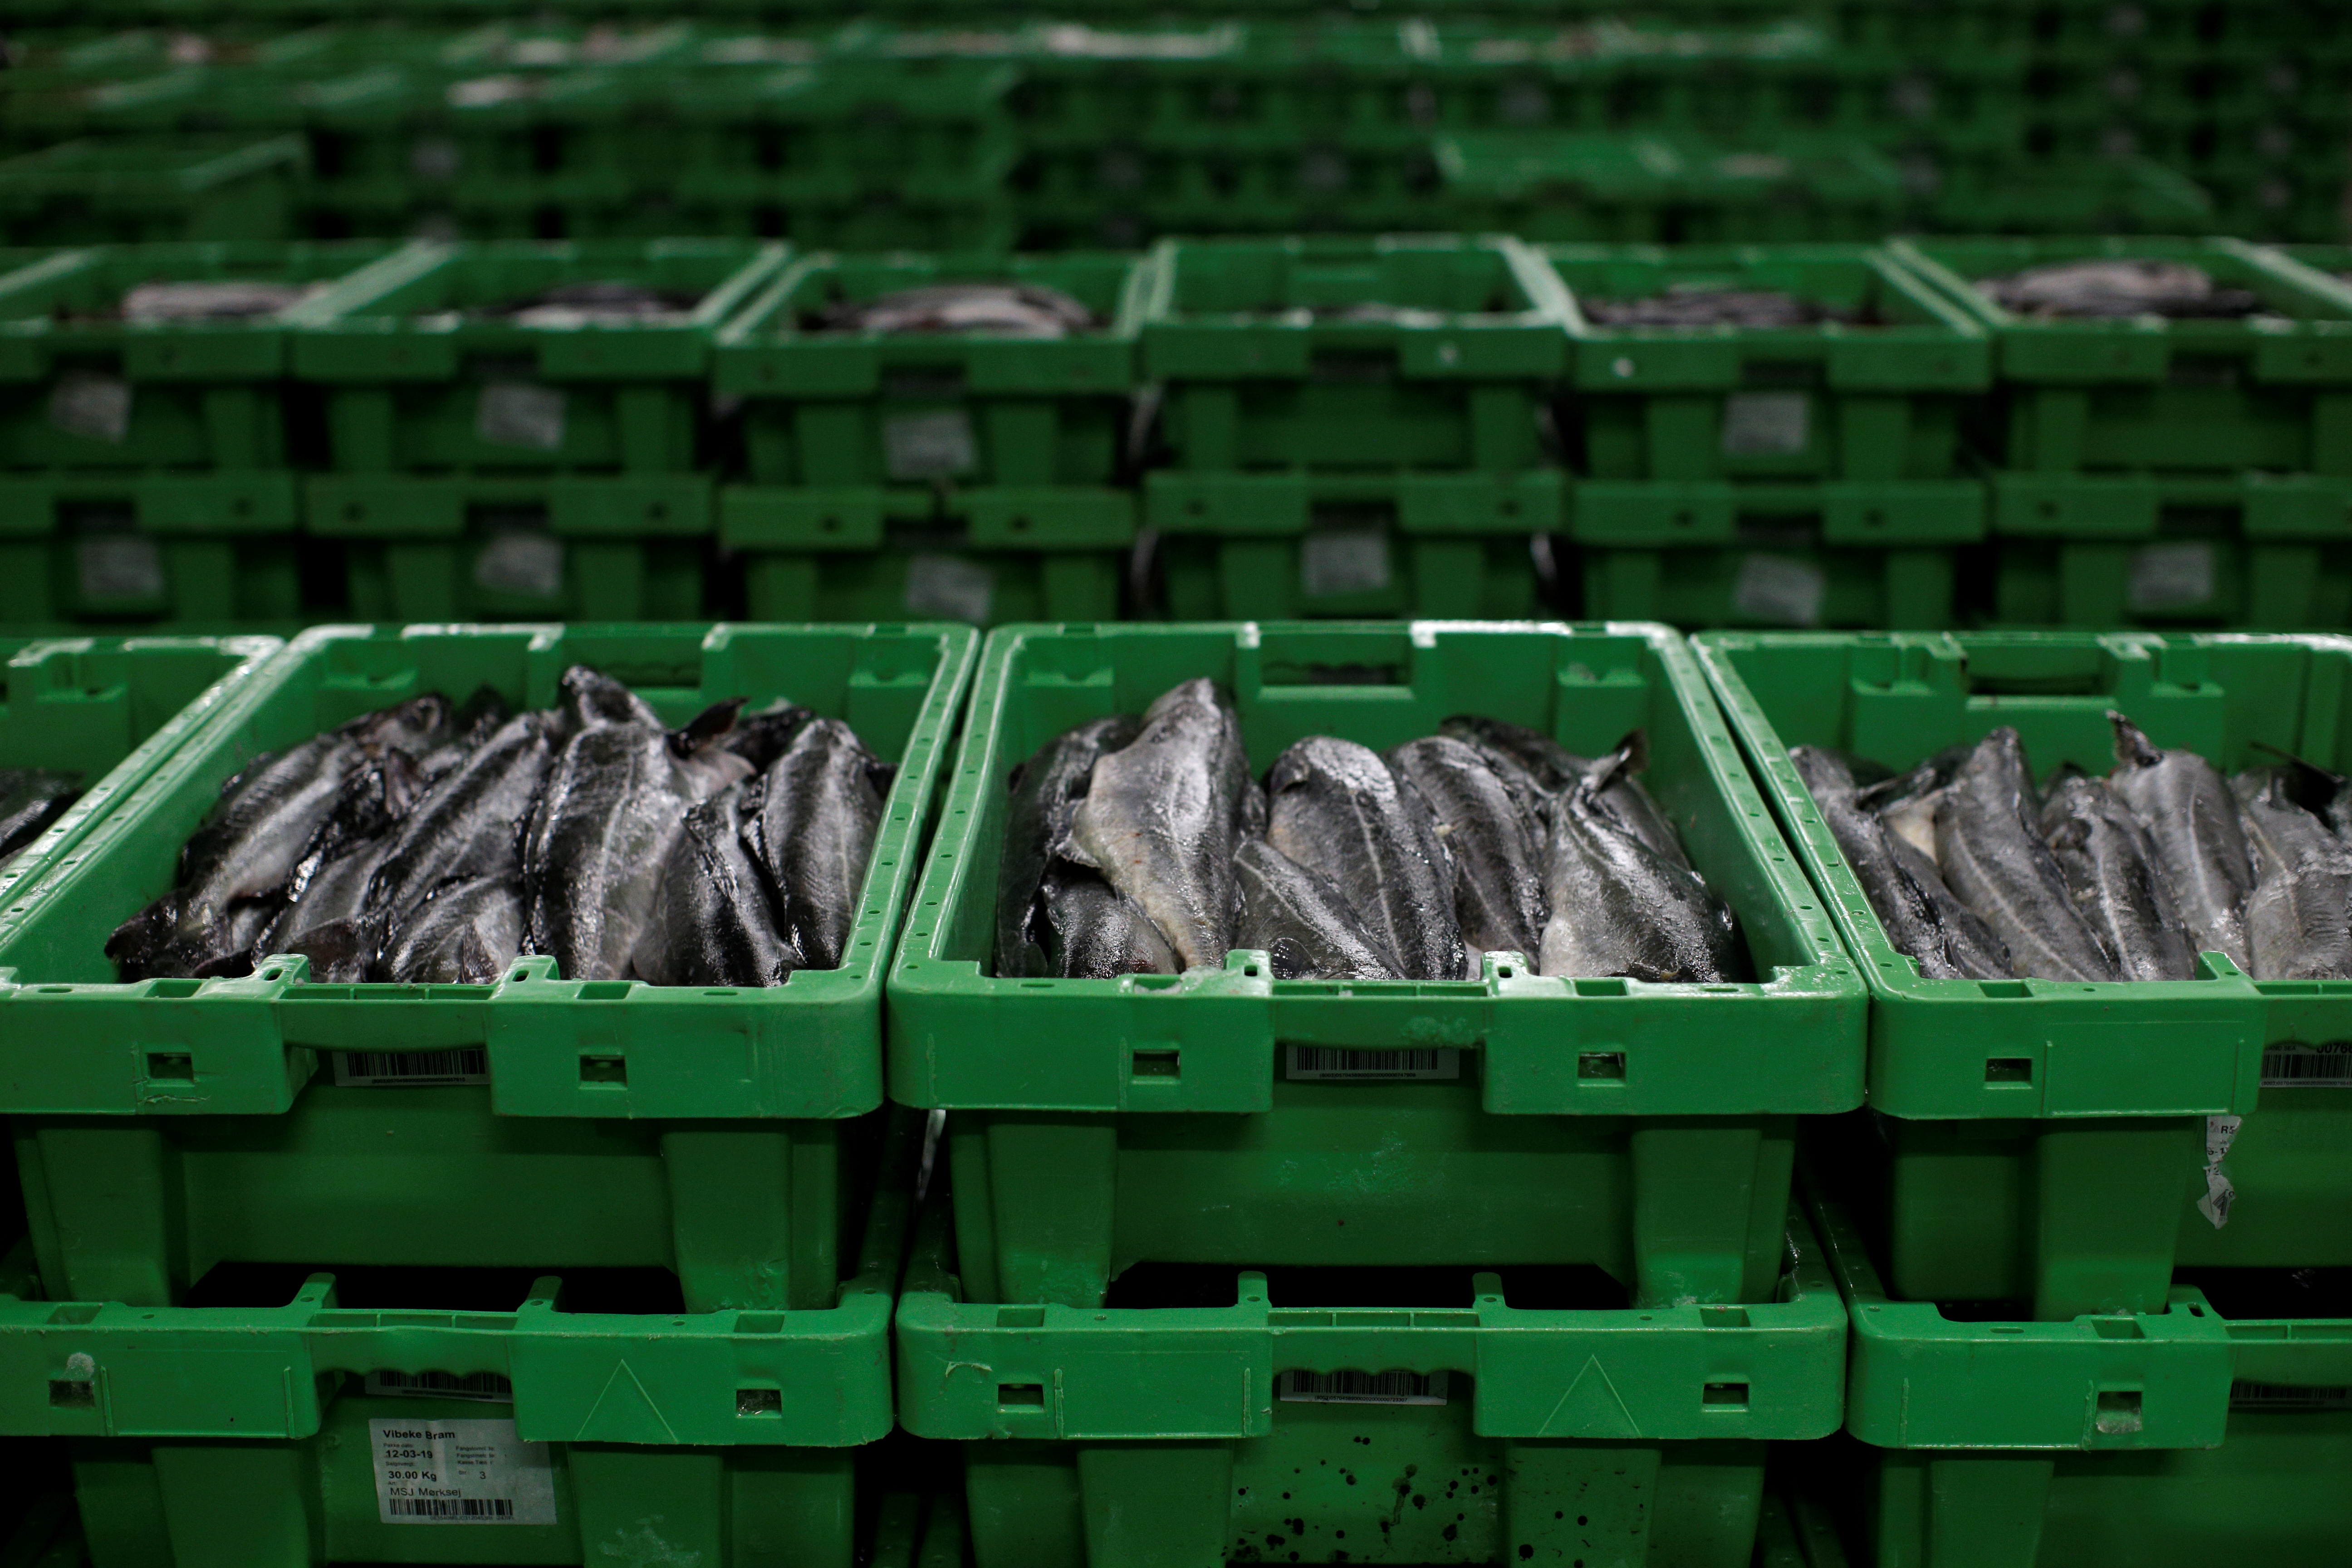 A haul of fish caught in British waters sits in a freezer at the Danske Fiskeauktioner, a fish auction facility in the village of Thyboron in Jutland, Denmark